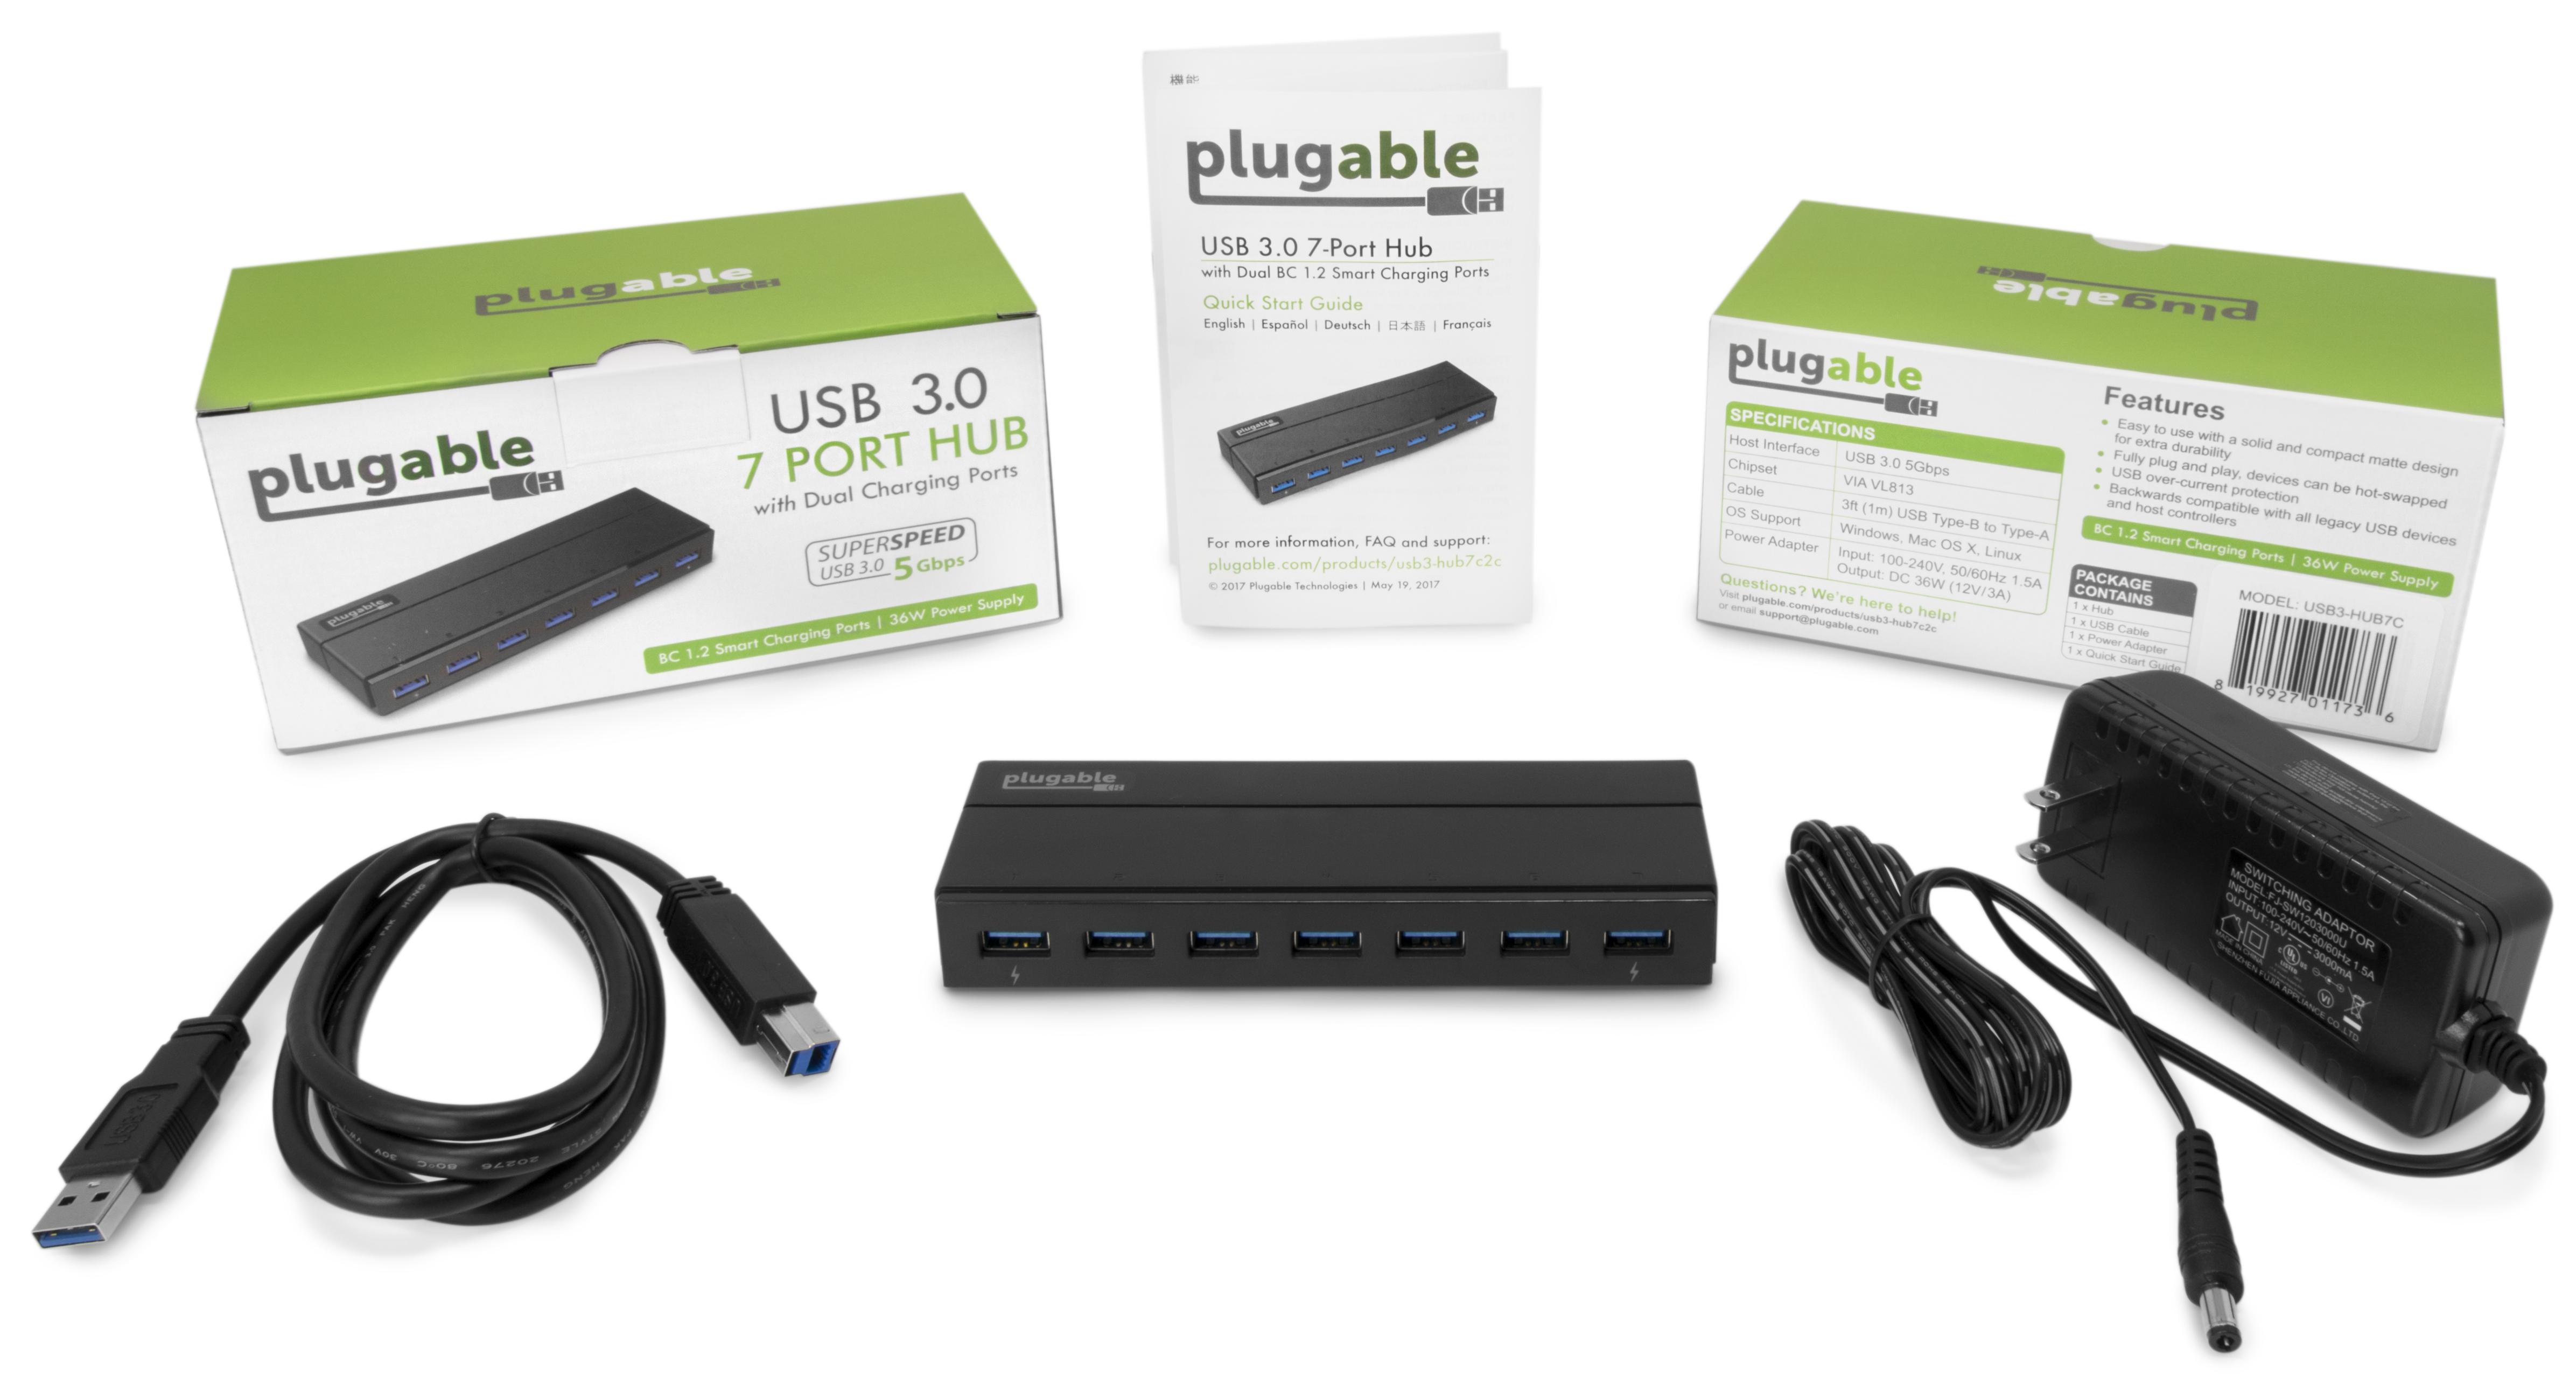 Plugable 7-Port USB 3.0 Hub with 36W Power Adapter - image 4 of 4